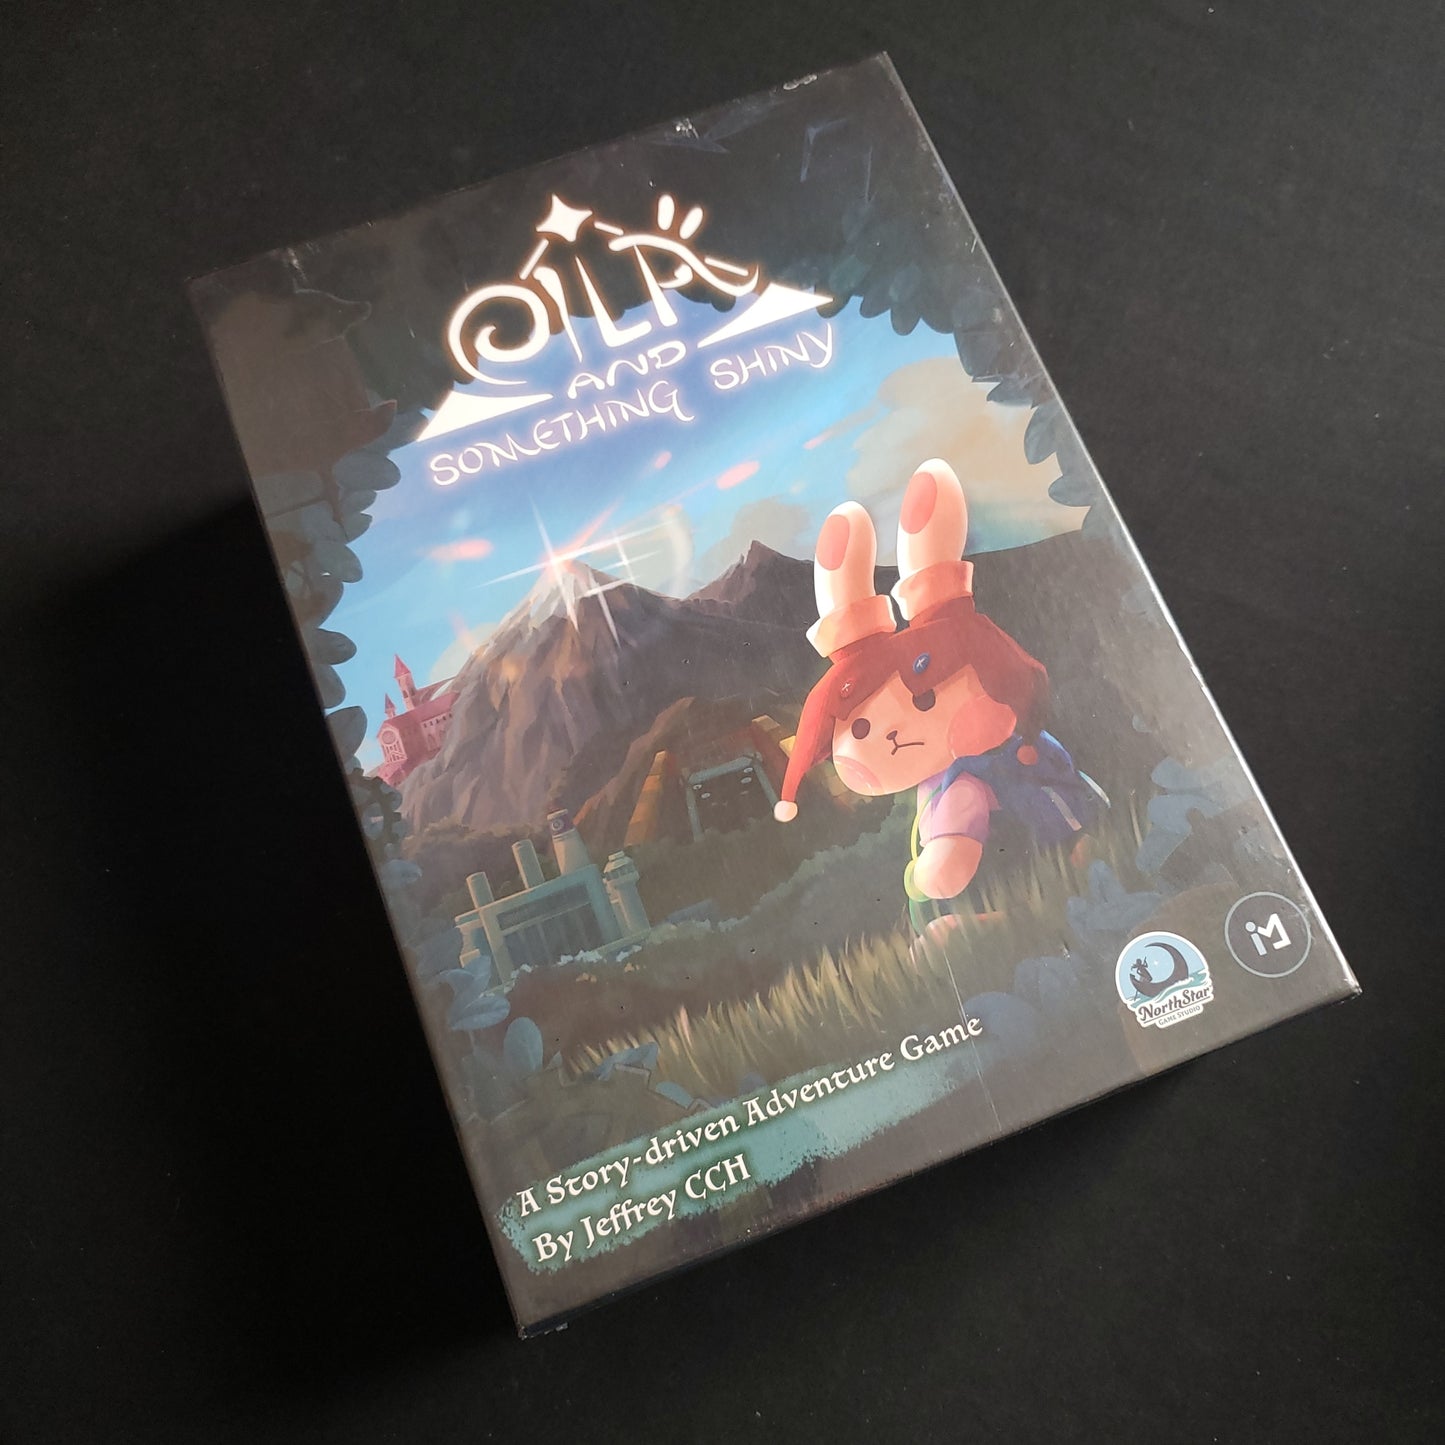 Image shows the front cover of the box of the Eila & Something Shiny board game